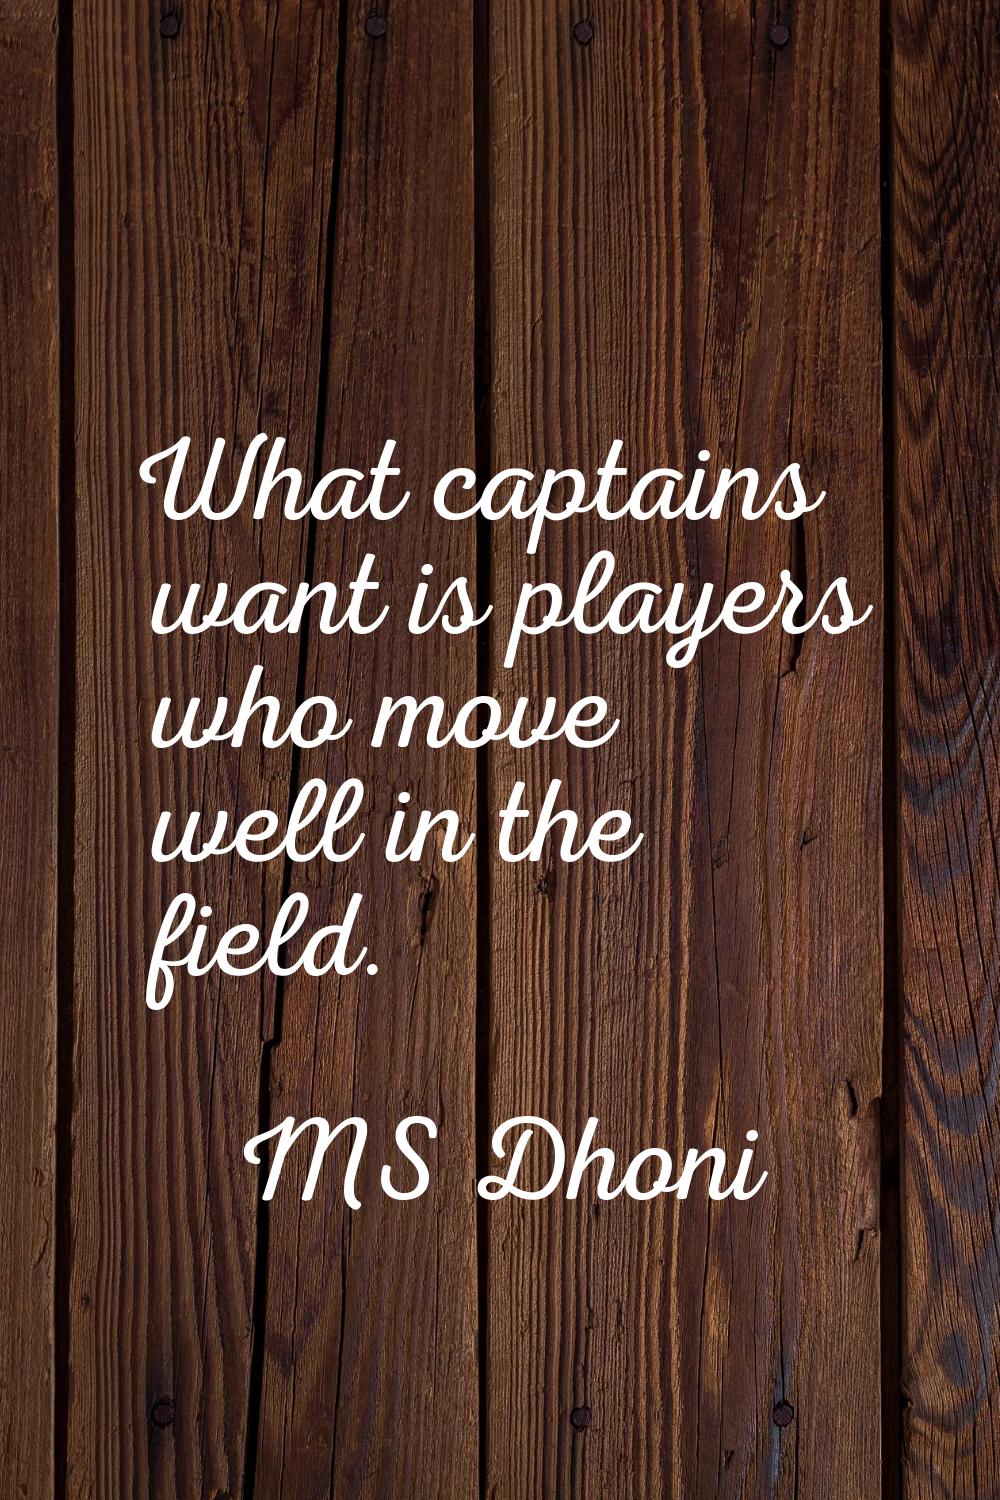 What captains want is players who move well in the field.